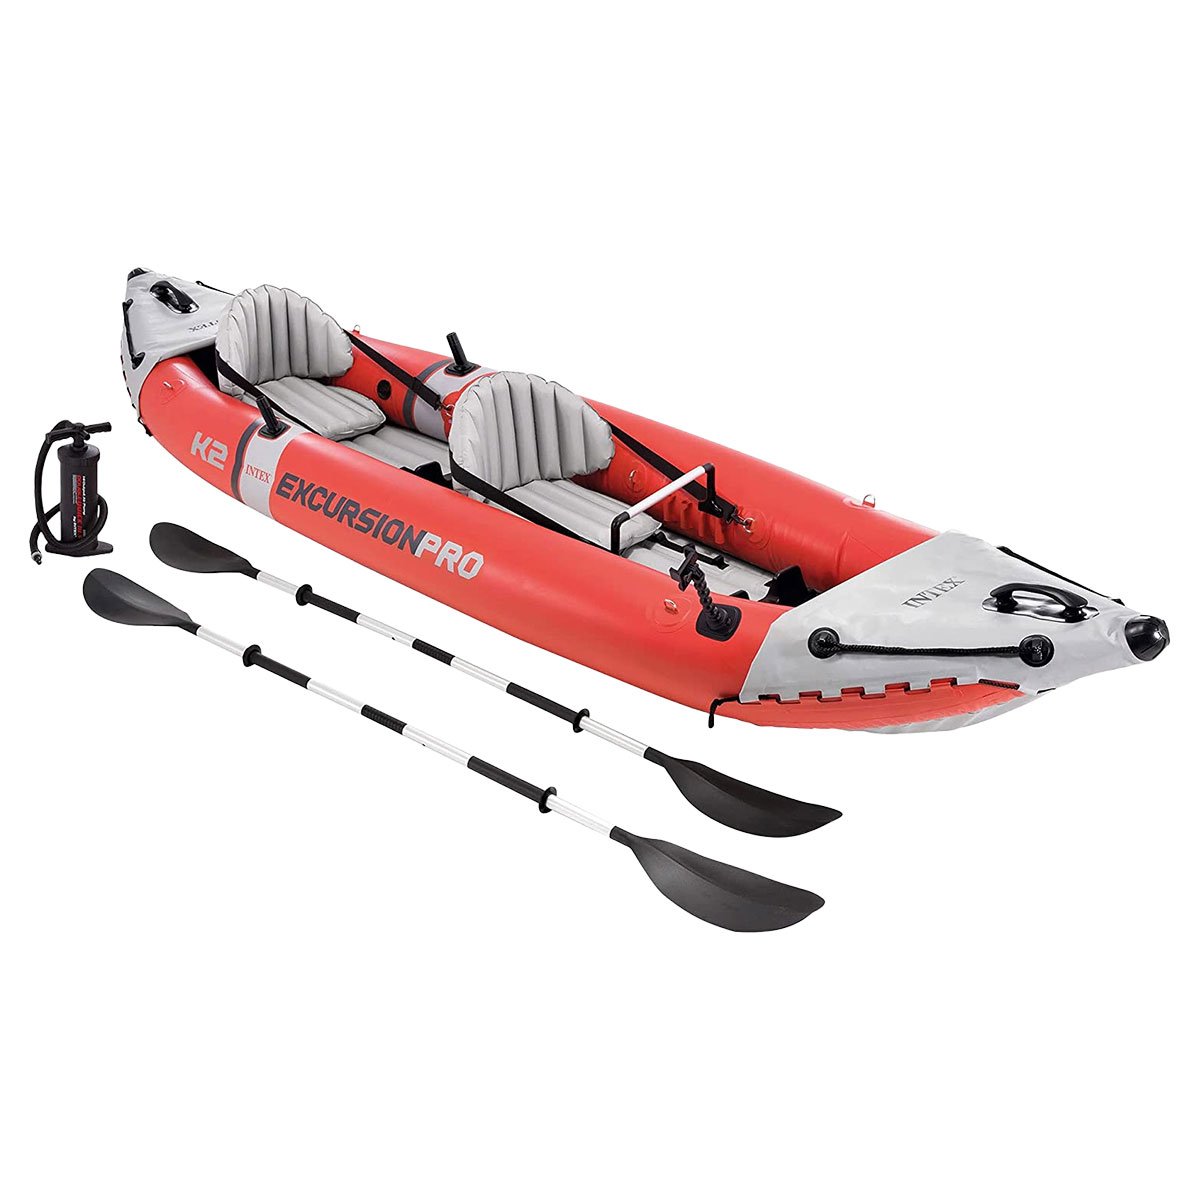 Intex 68309NP Excursion Pro K2 2-Seater Inflatable Kayak with Paddles 1